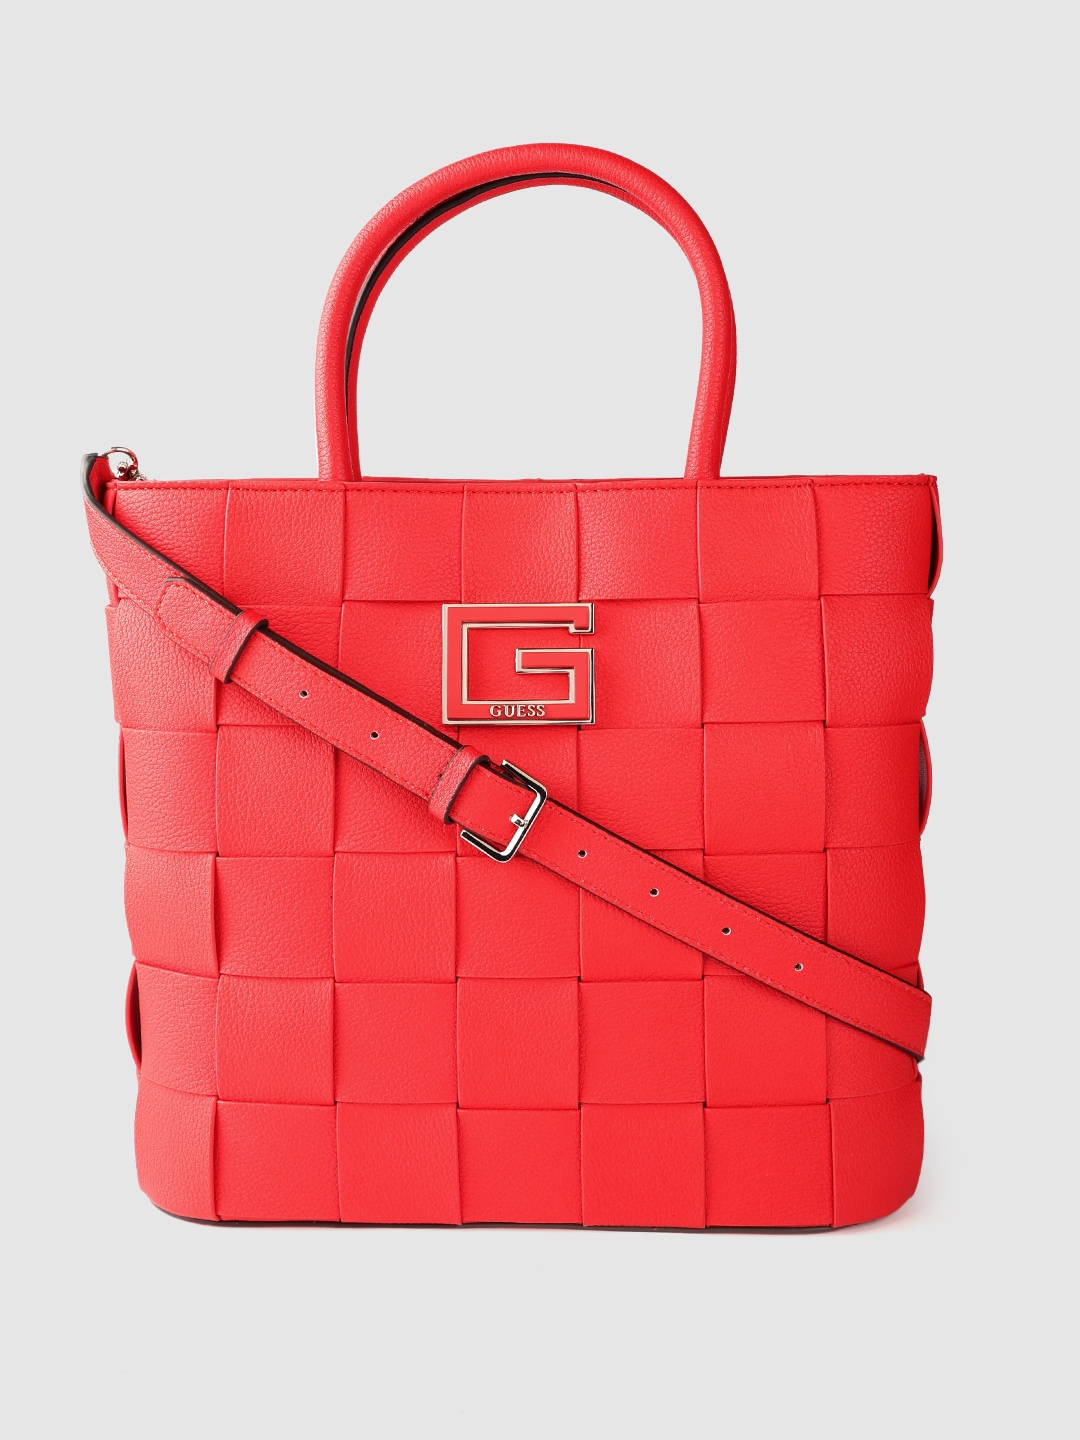 GUESS Women Coral Woven Design Upper Structured Handheld Bag Price in India